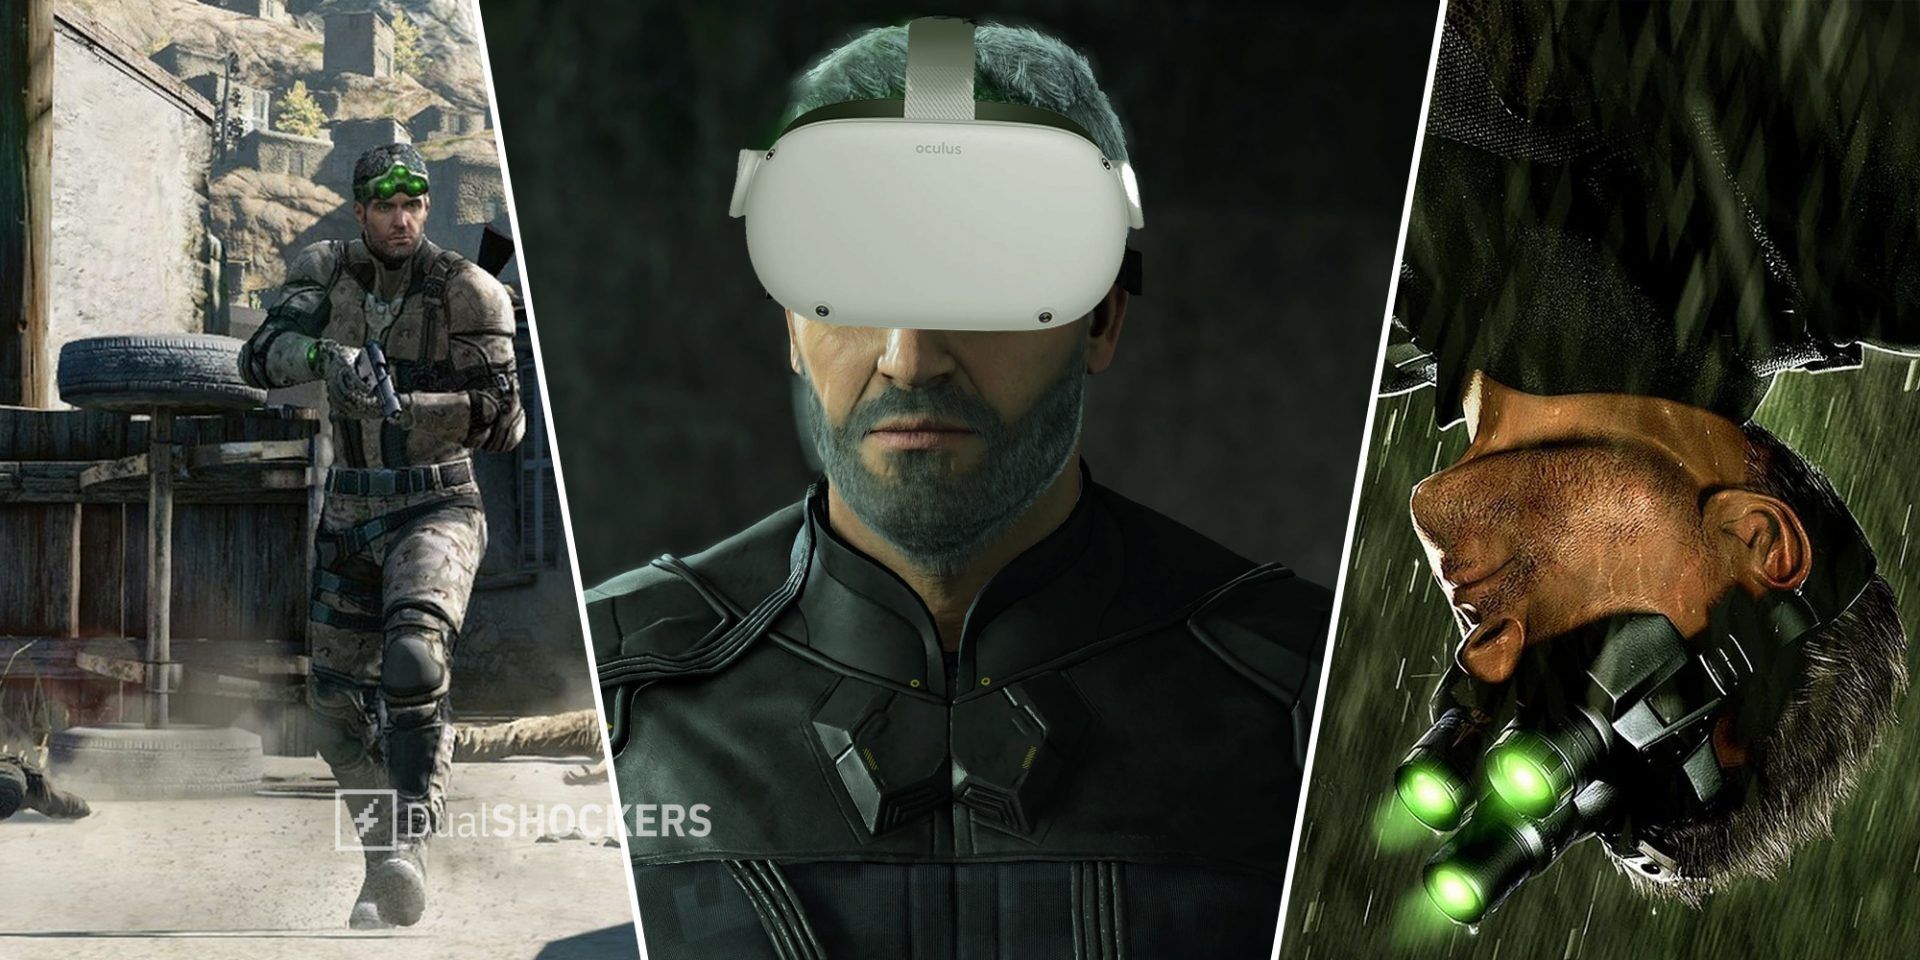 The Cancellation Of Splinter Cell VR Sucks, But Maybe It's For The Best